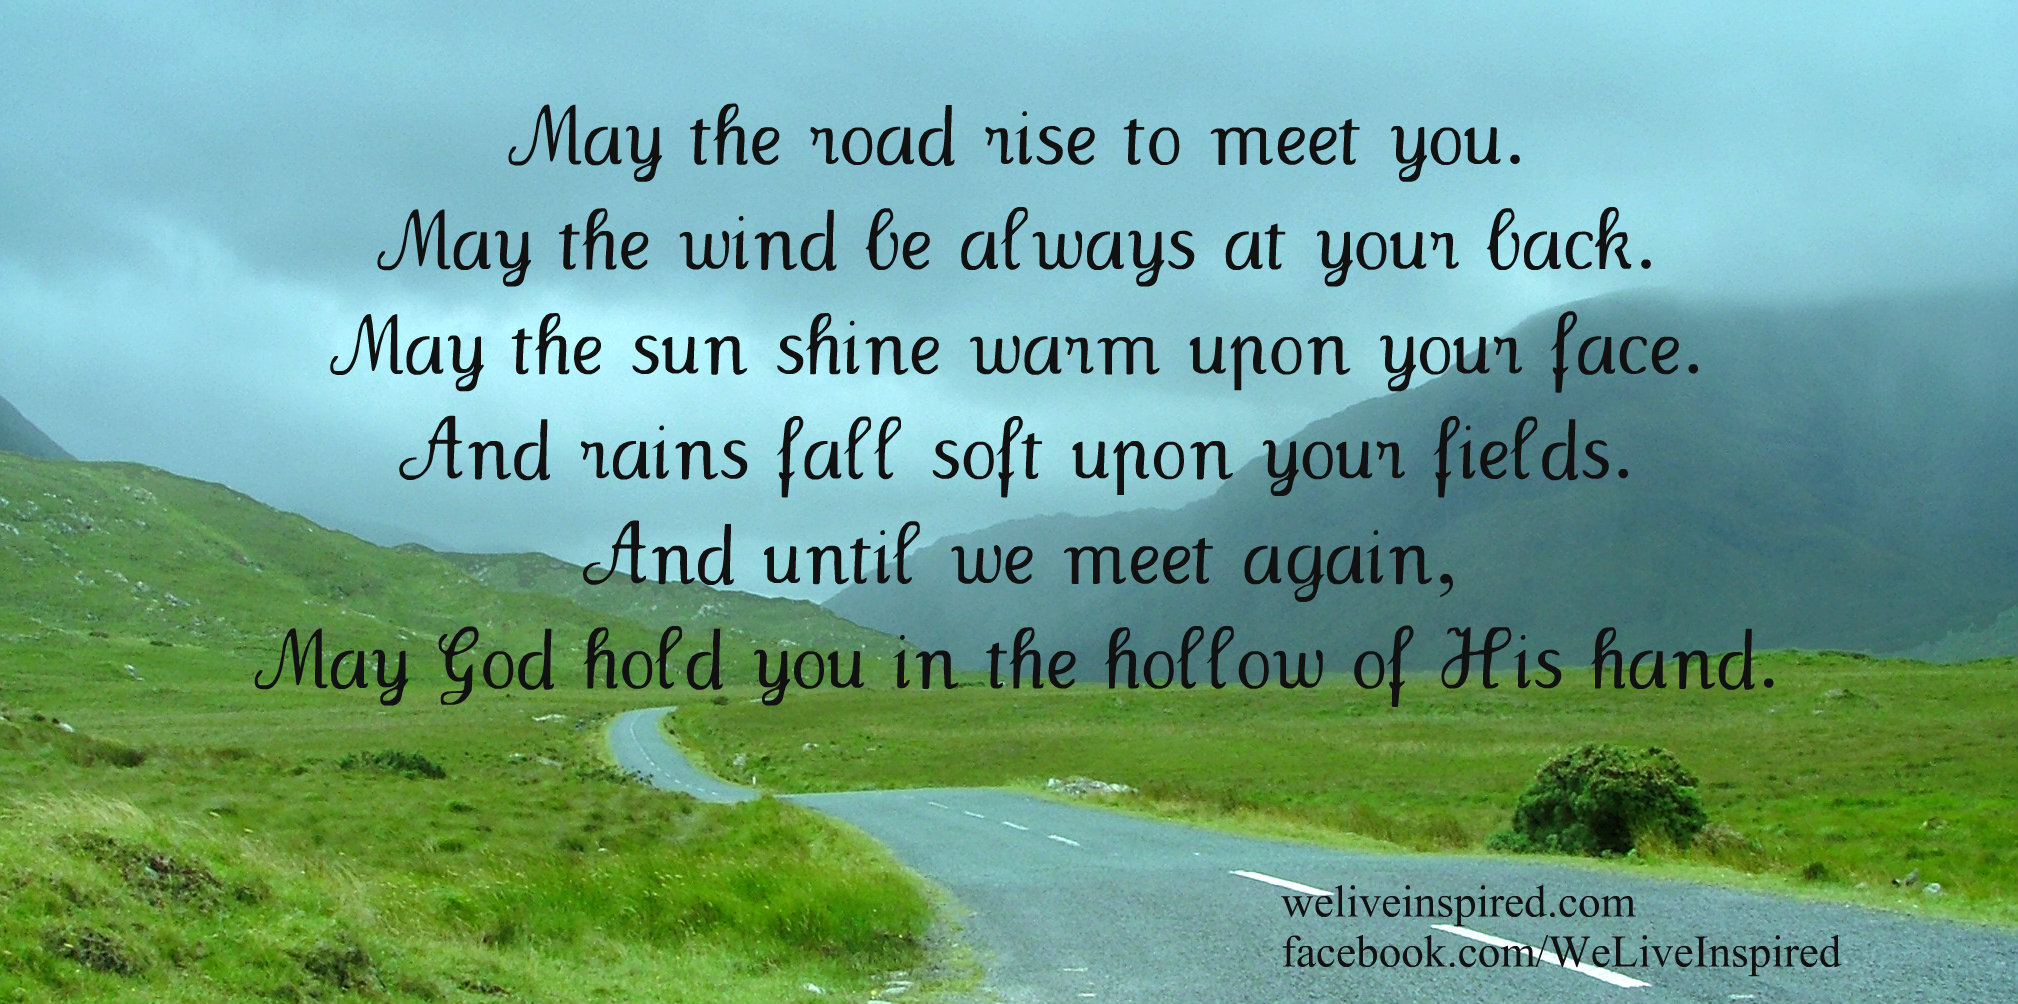 free-download-irish-blessing-may-the-road-may-the-road-rise-to-meet-you